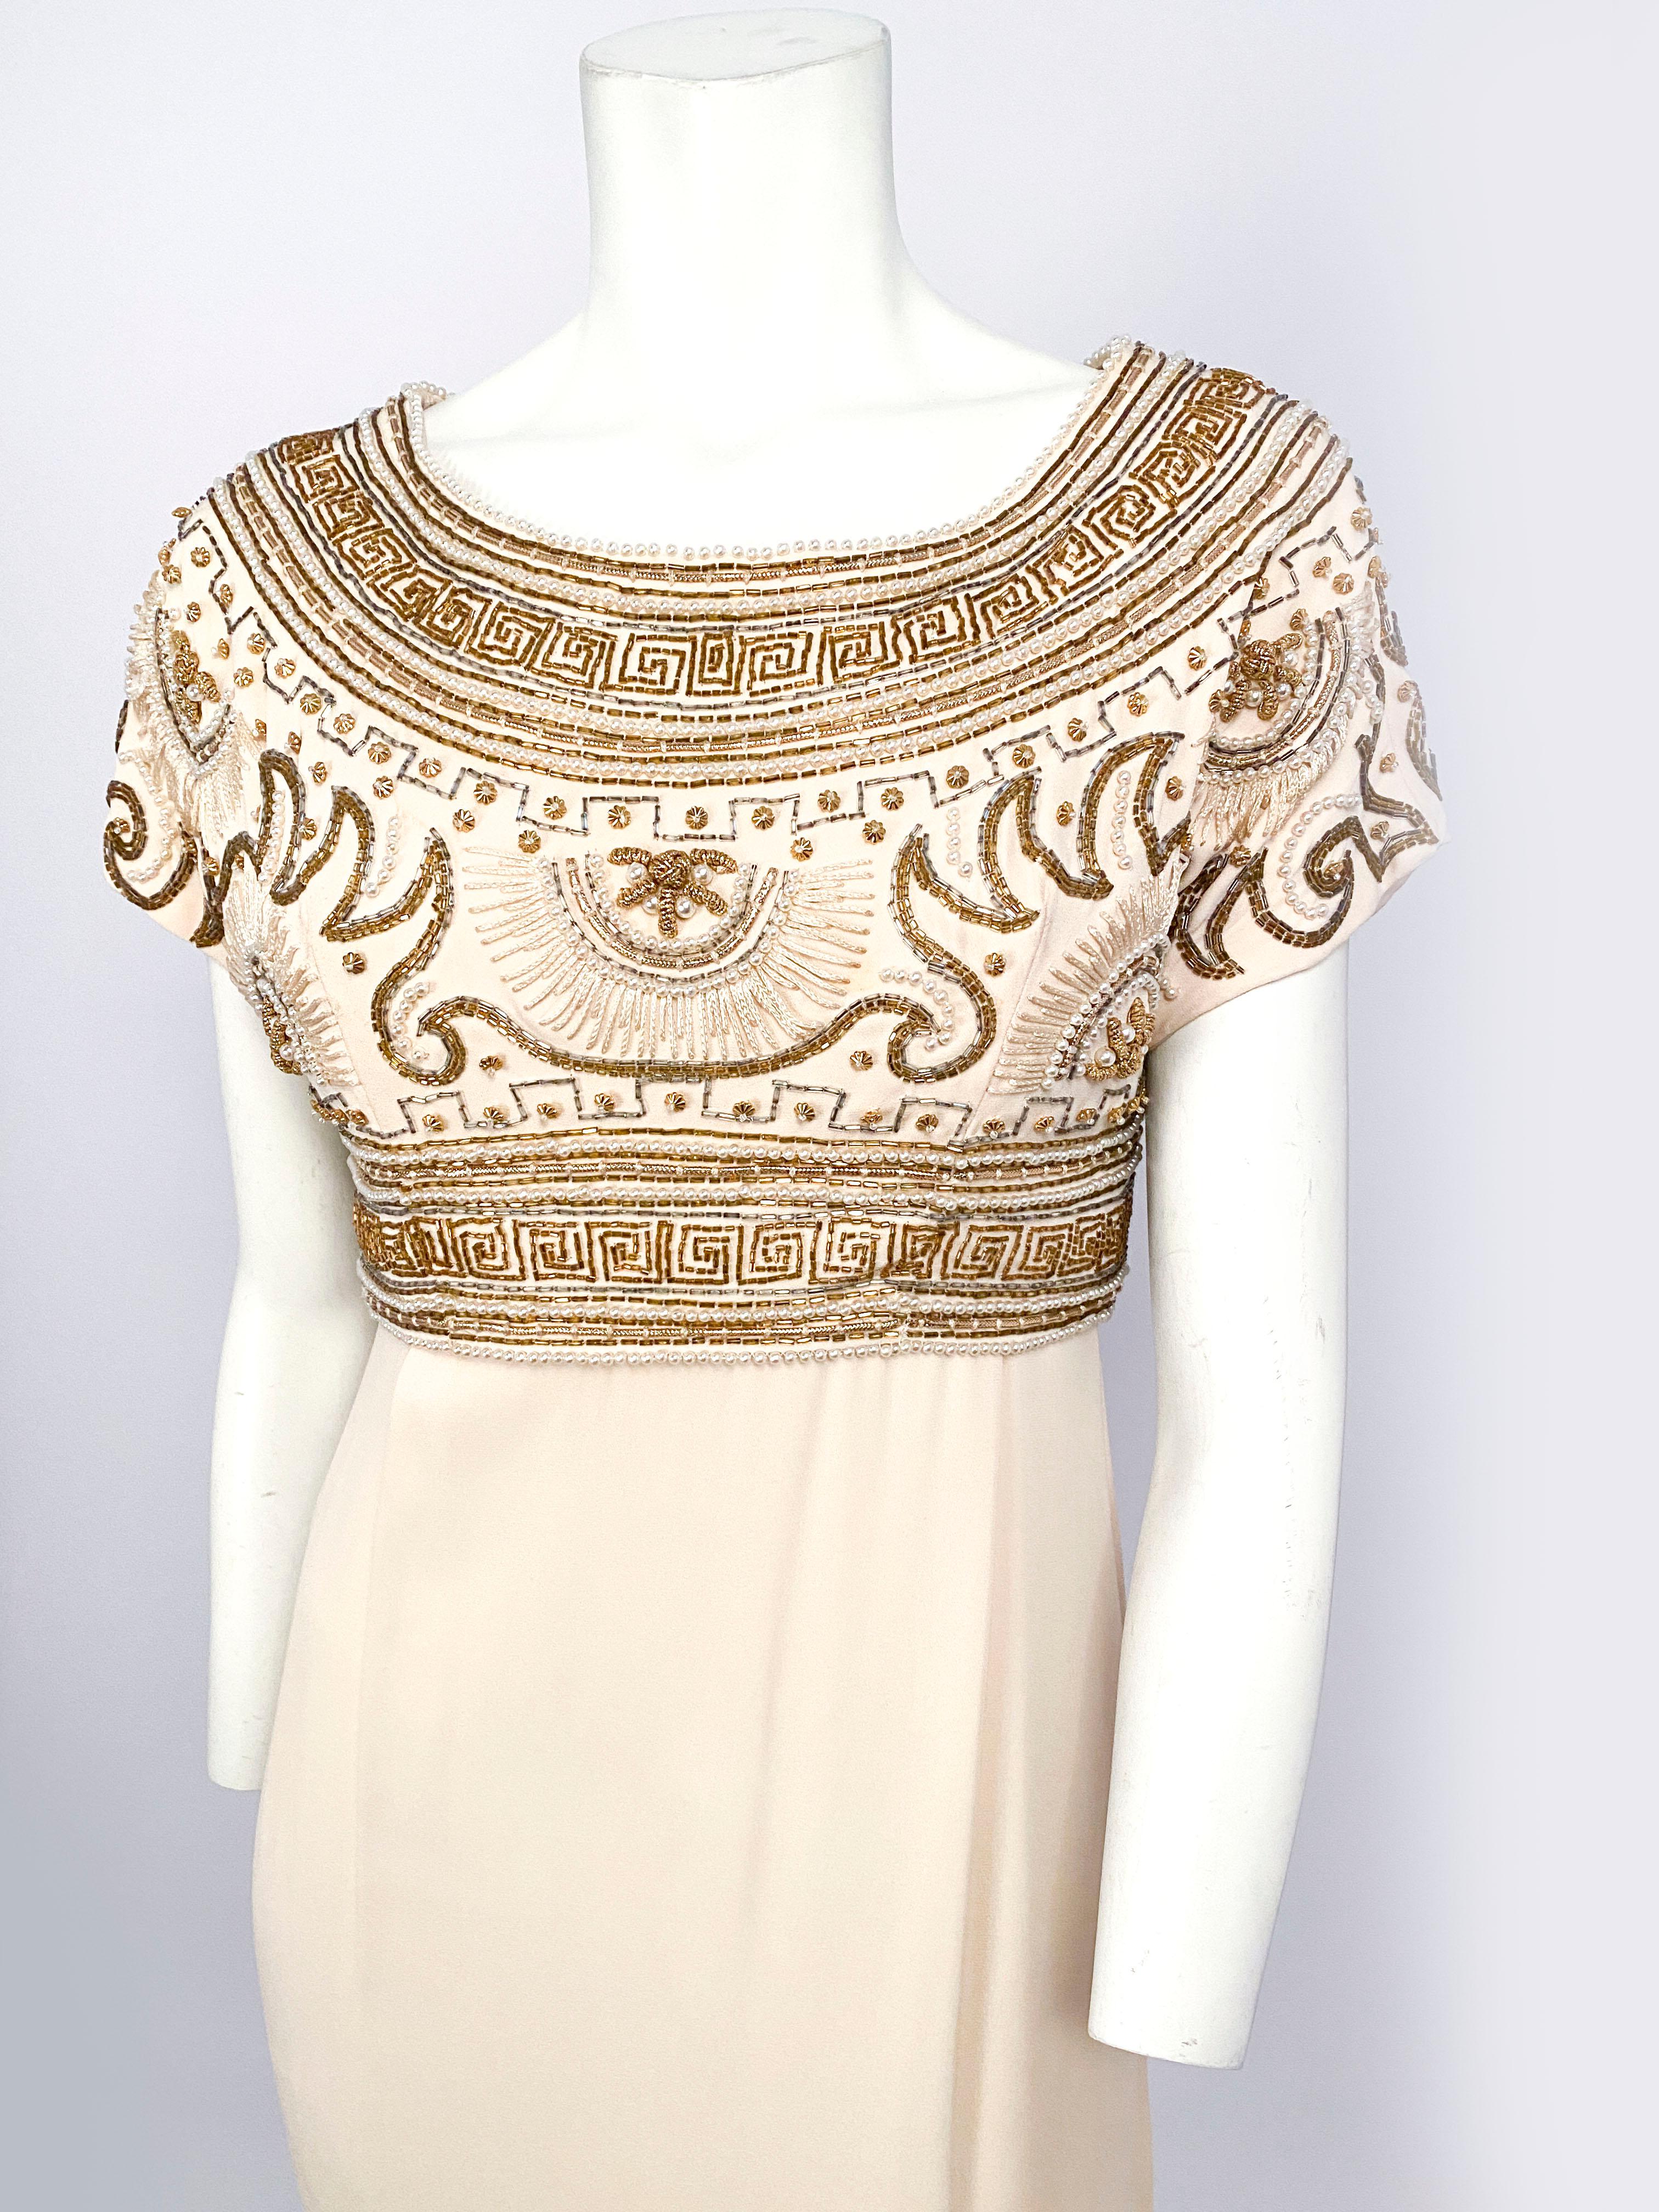 1960s Helen Rose full-length evening gown in a cream silk chiffon featuring ornate beadwork and embroidery with pearls, glass beads, and brass decoration. Beading is along the bottom of the skirt and the removable top and features Egyptian patterns